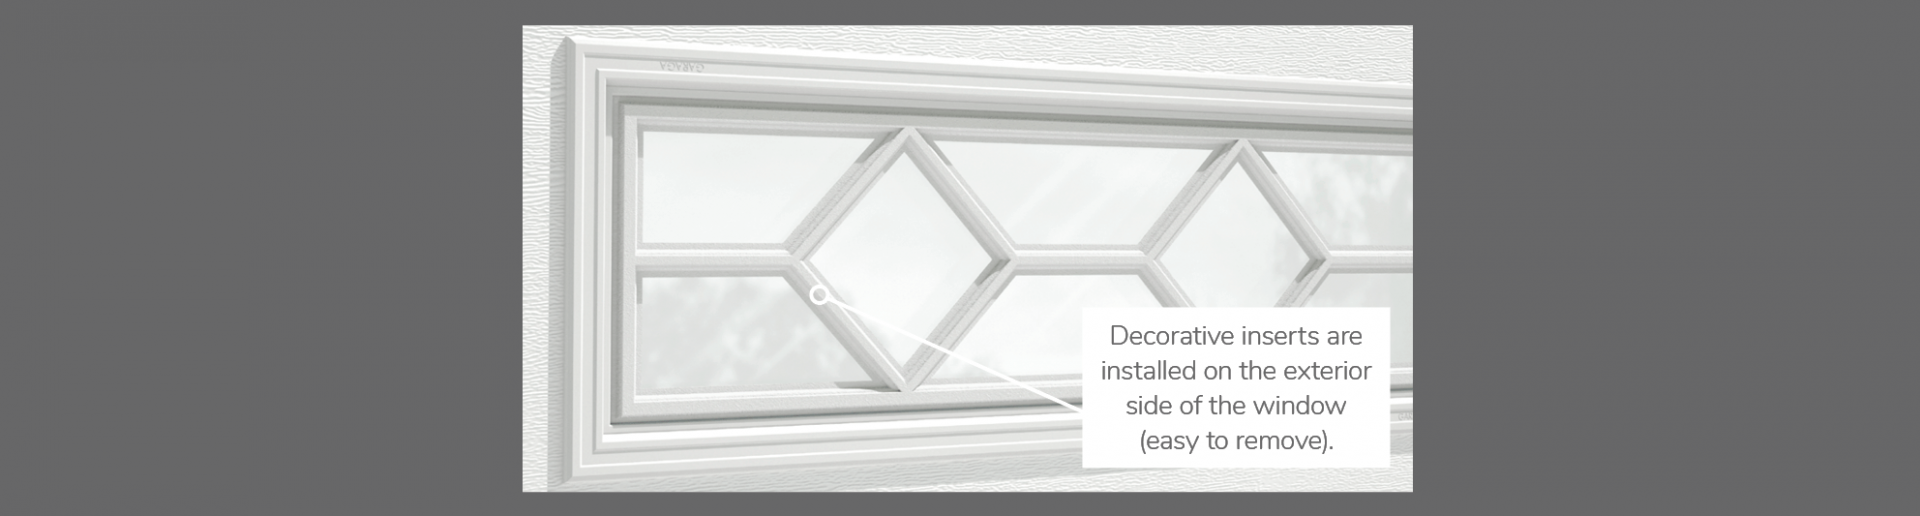 Waterton Decorative Insert, 40" x 13", 21" x 13", 41" x 16" or 20" x 13", available for door R-16